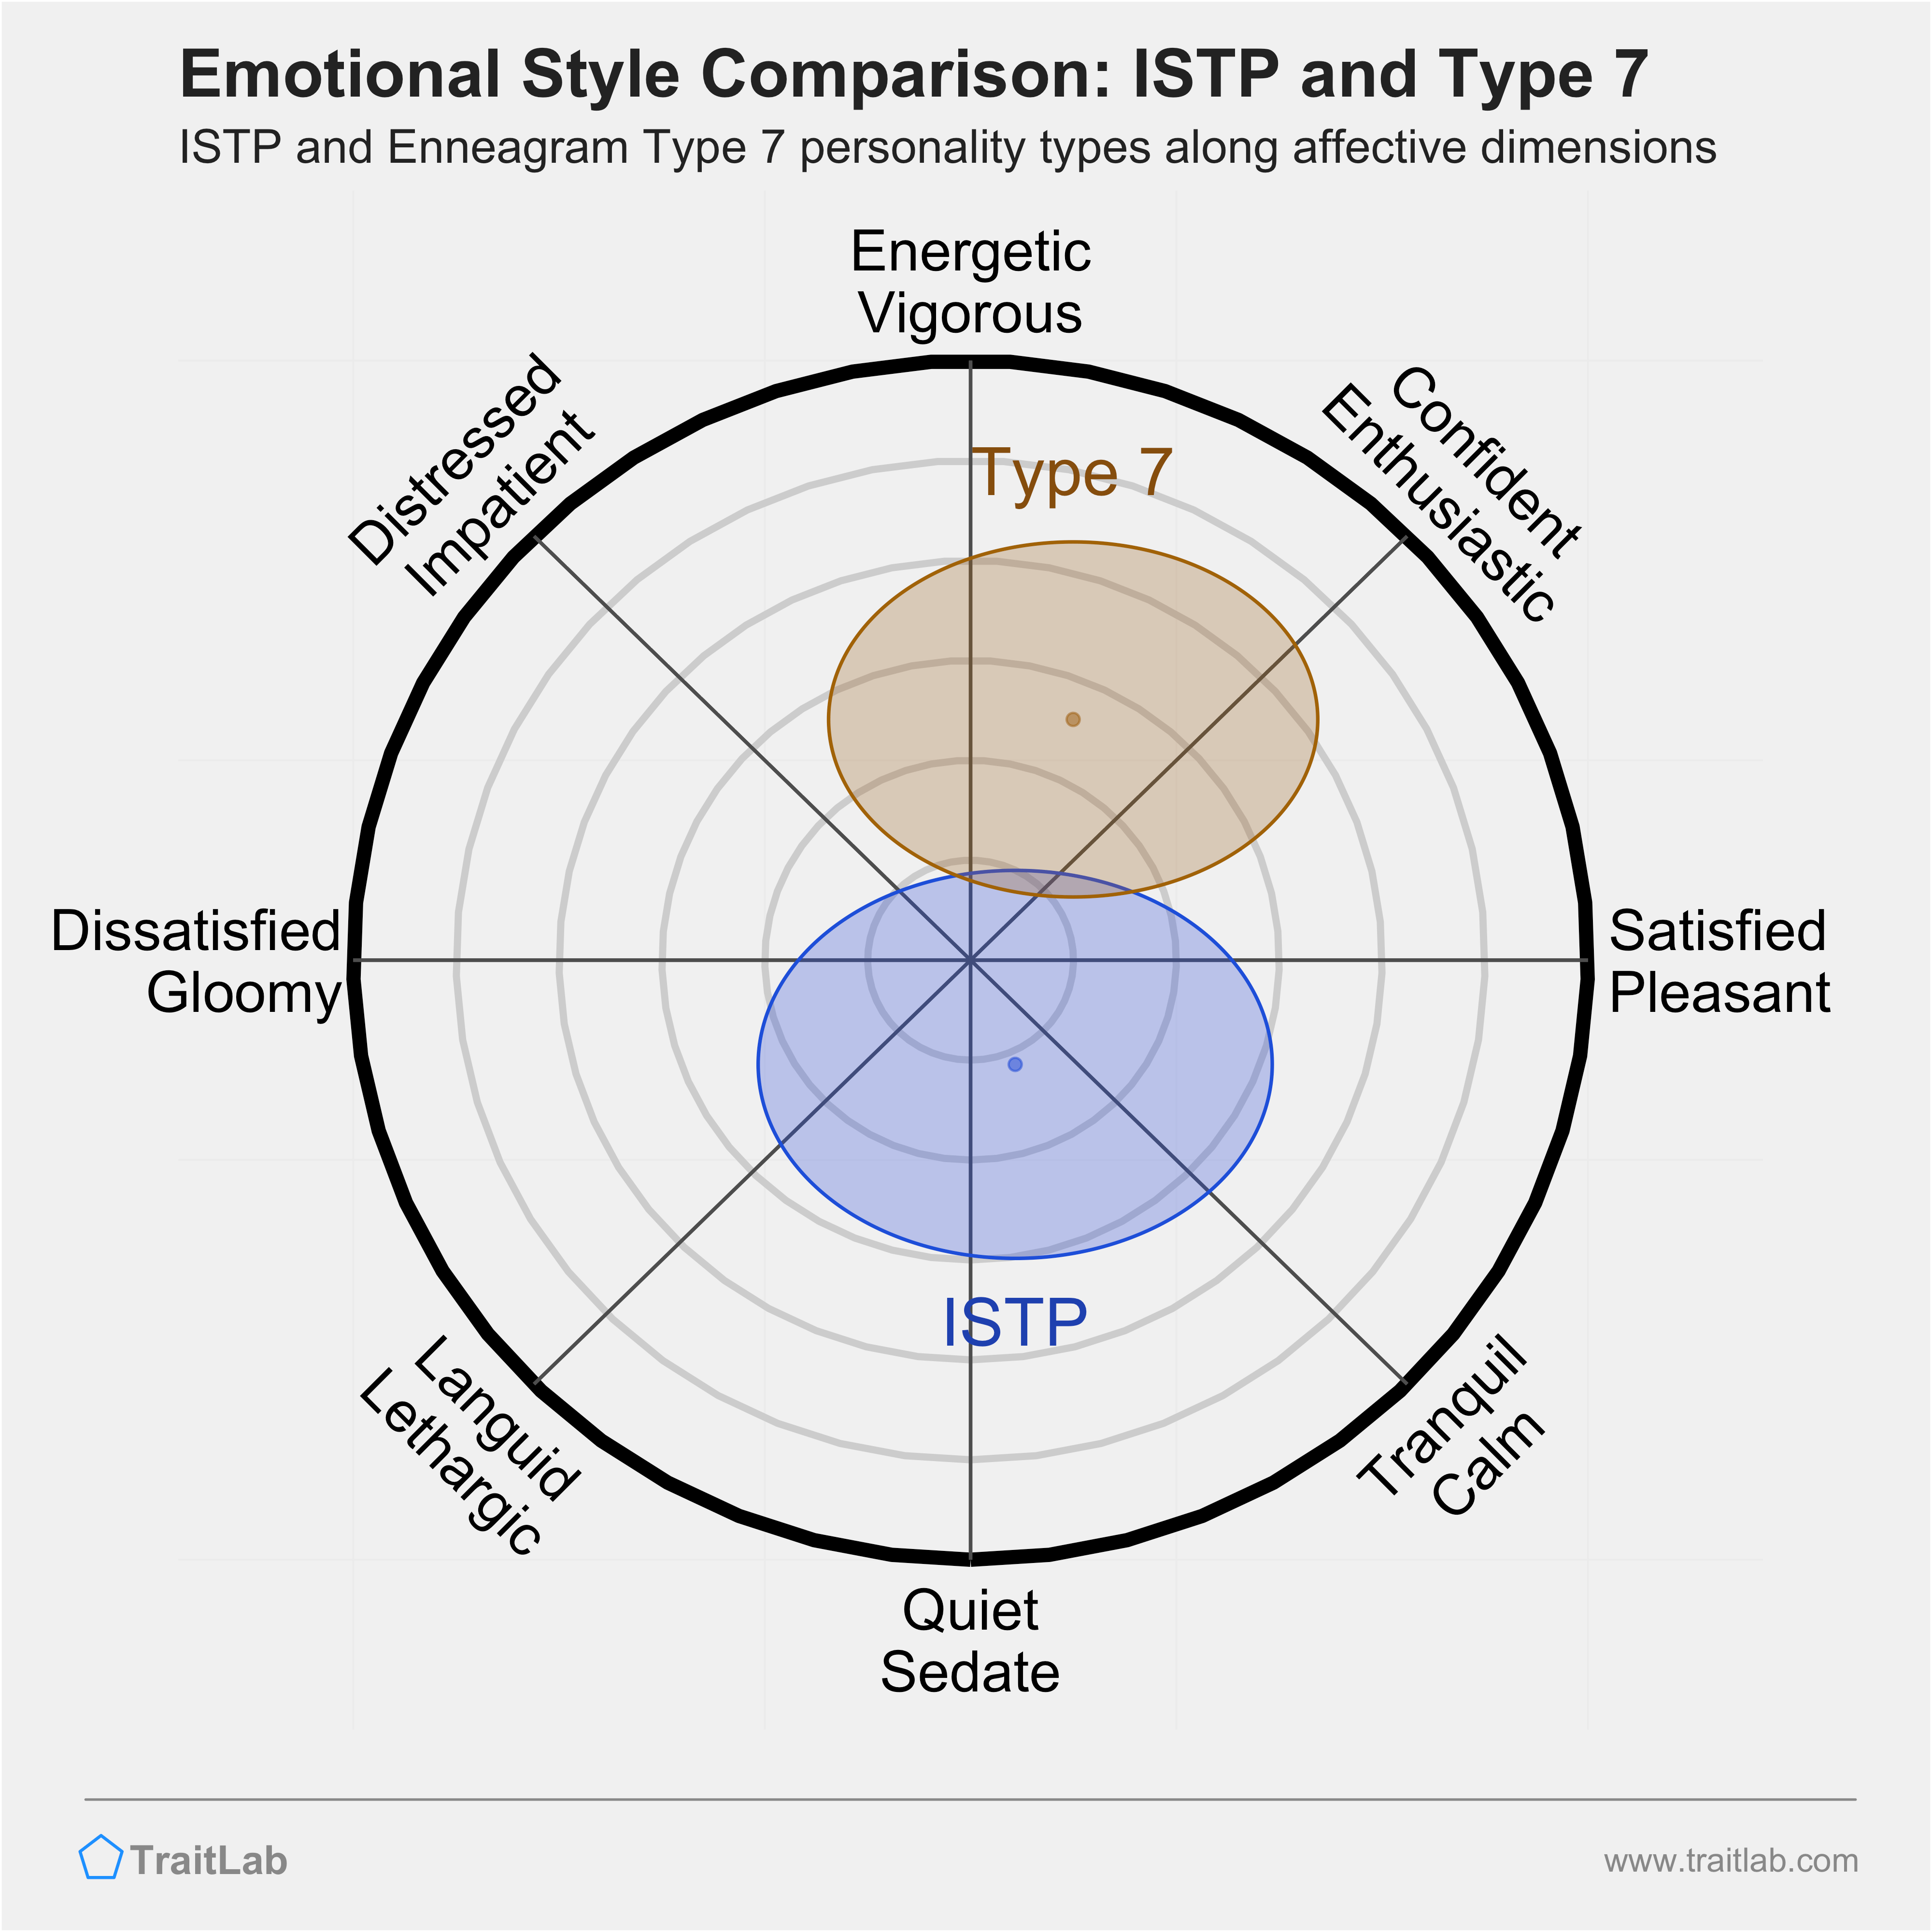 ISTP and Type 7 comparison across emotional (affective) dimensions